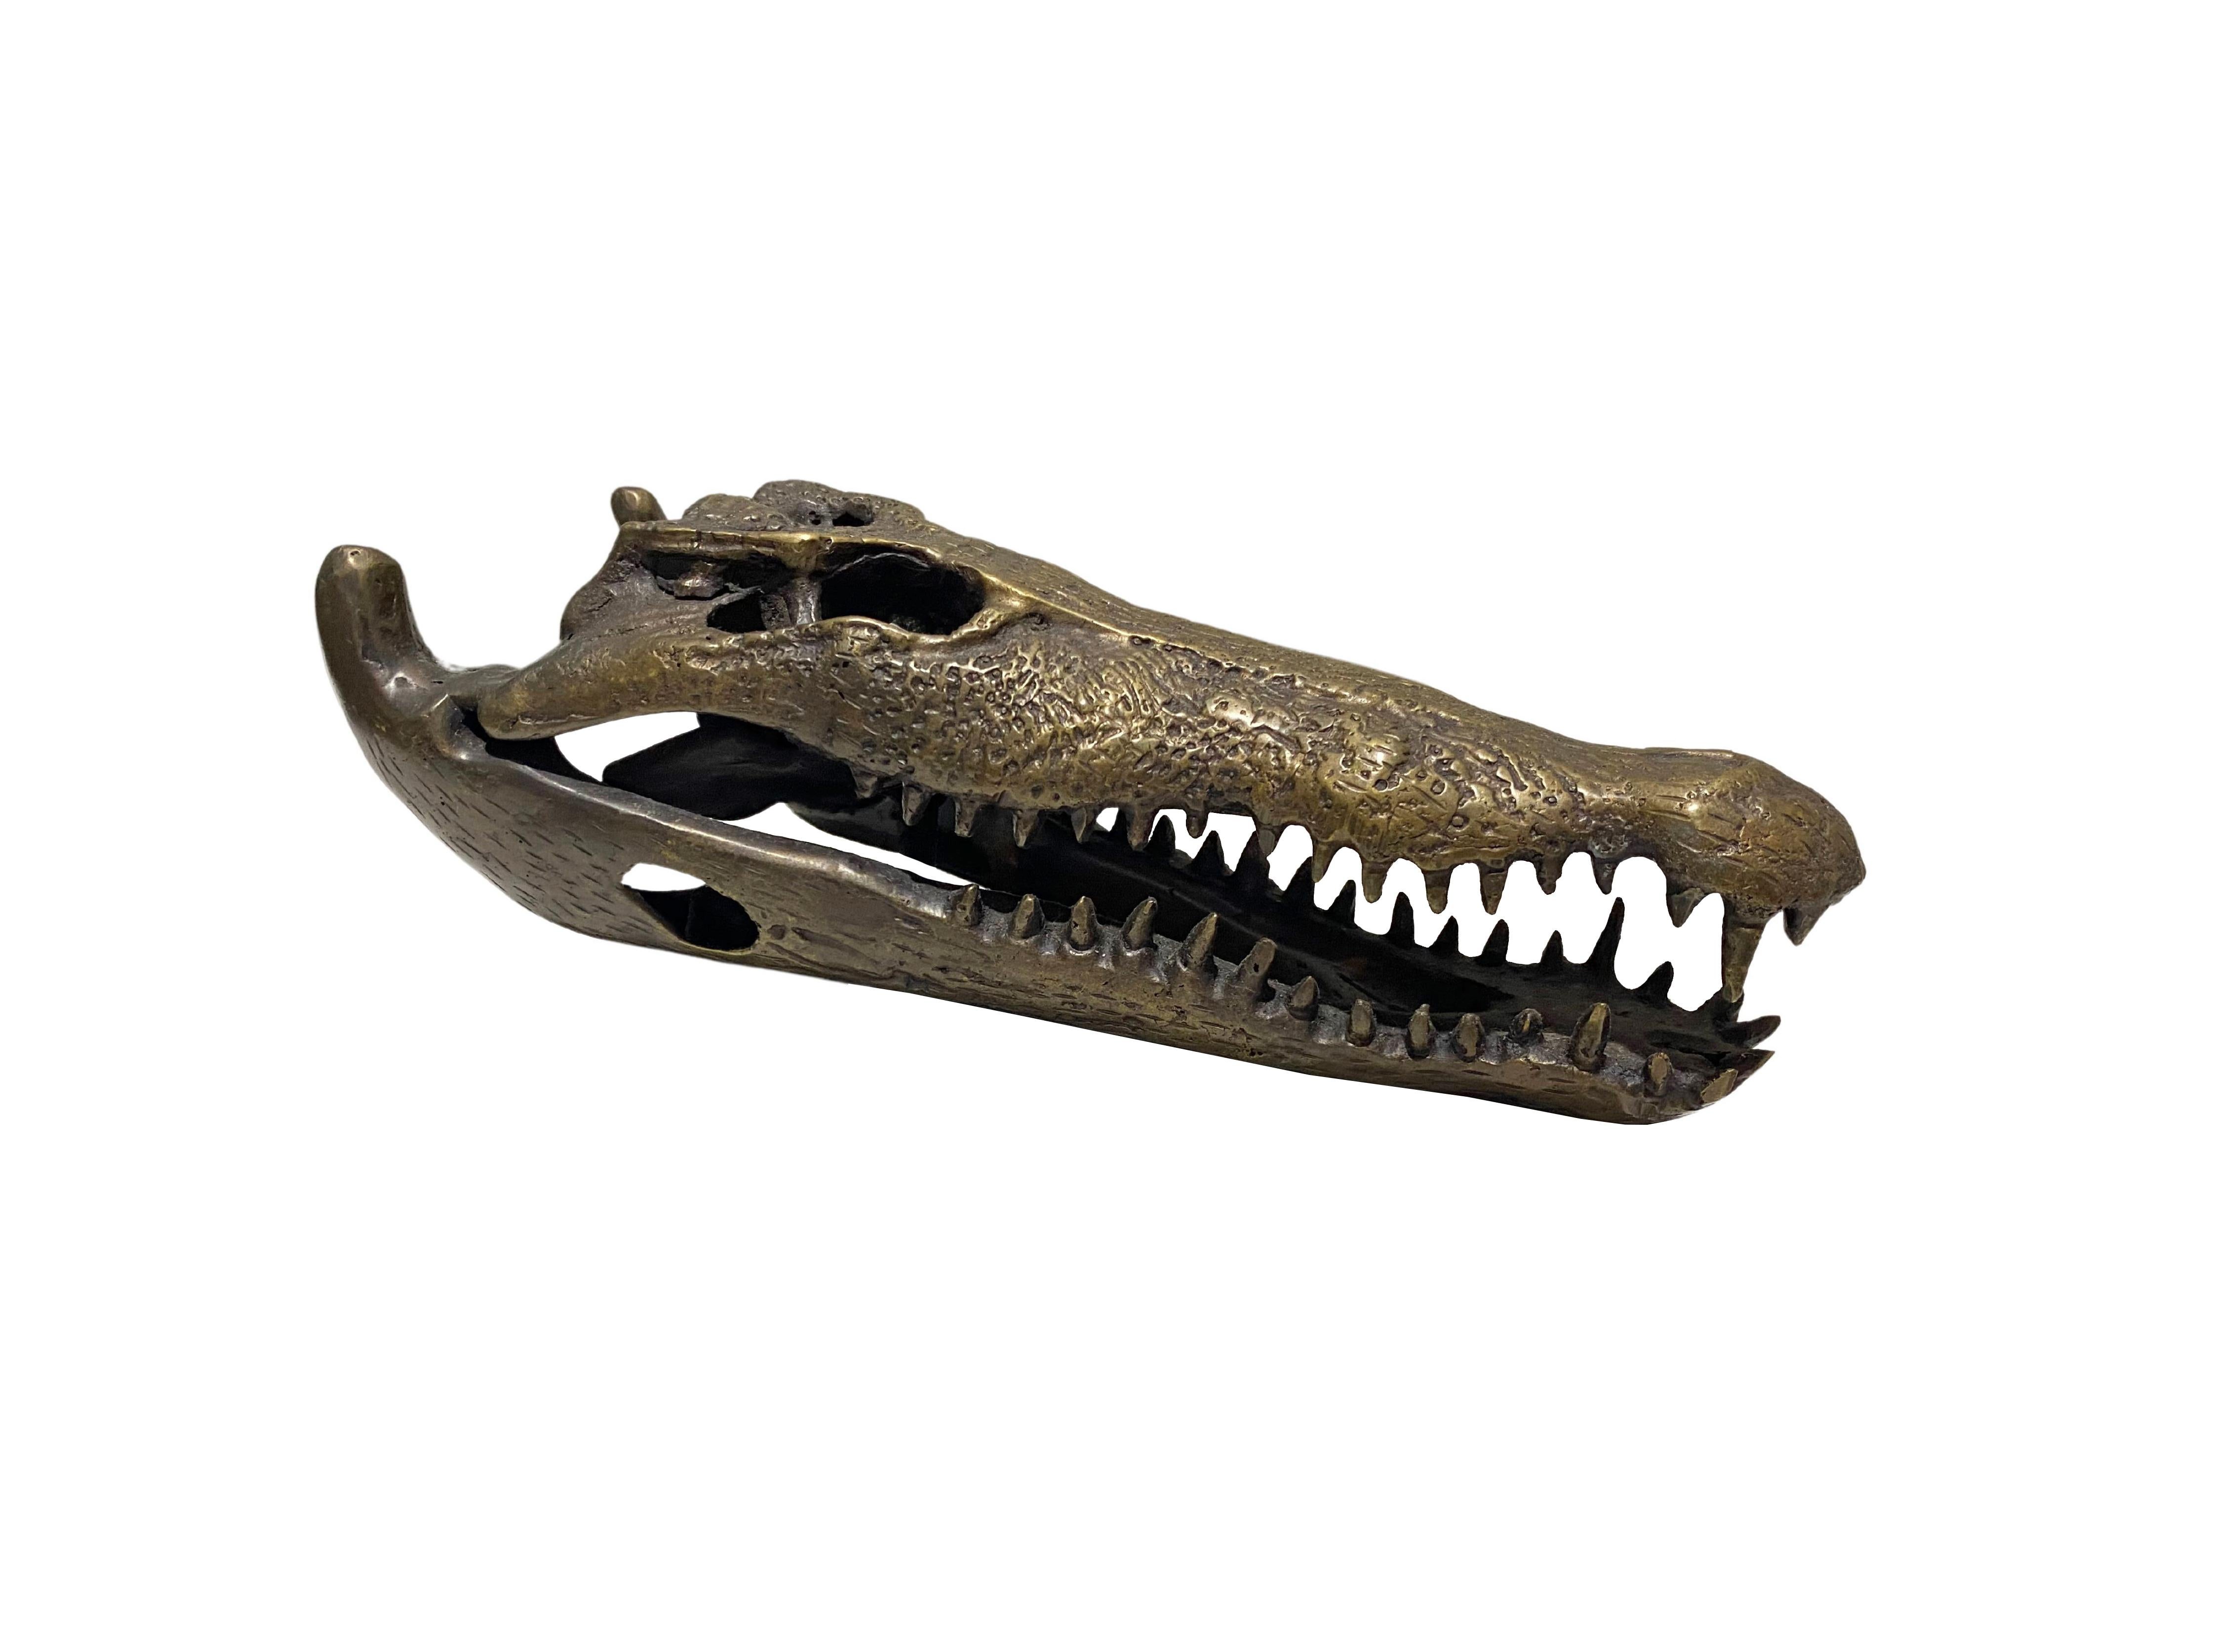 A wonderful example of a hollow-cast bronze crocodile skull. This piece features wonderful detail and resemblance to a real specimen. An exotic piece certain to invoke conversation. Suitable for both indoor or outdoor spaces.
 